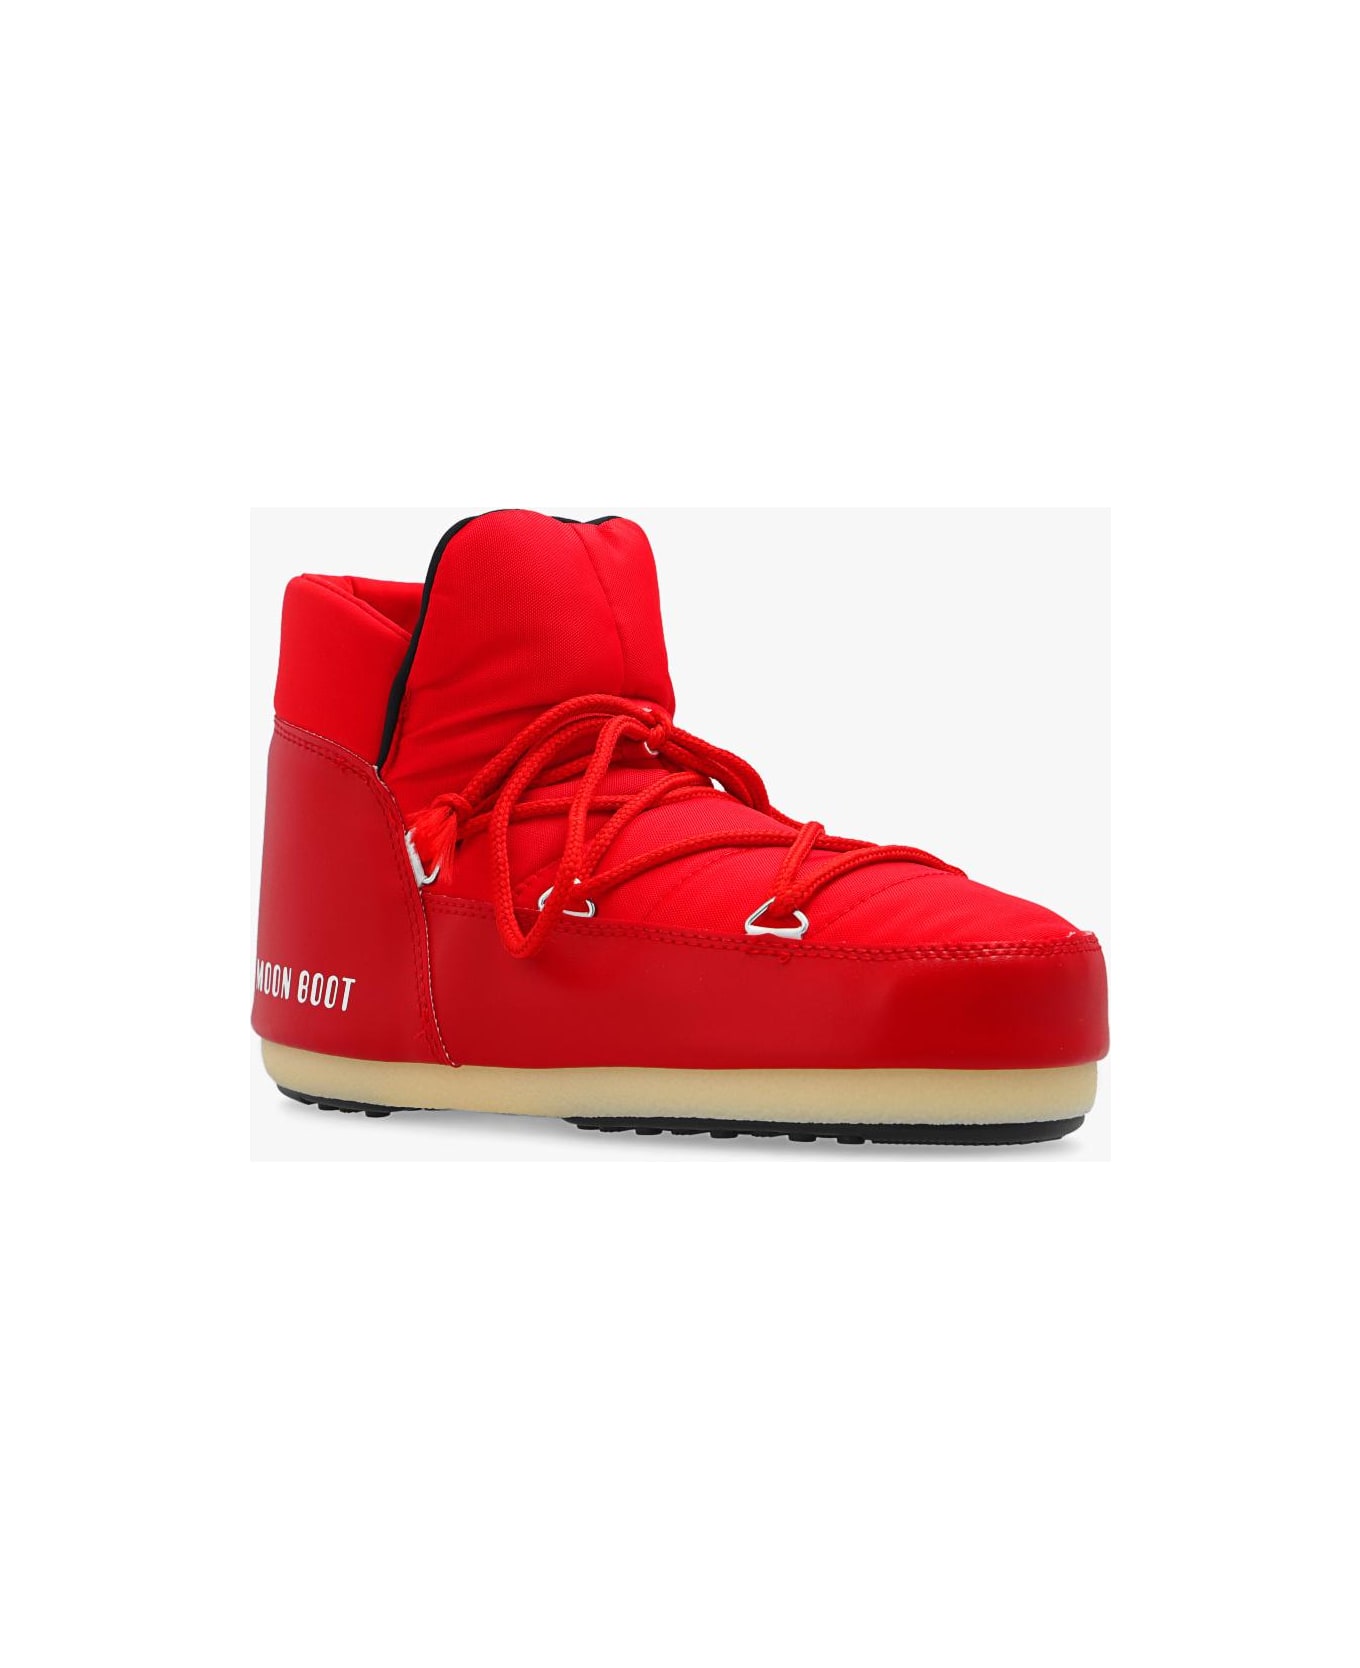 Moon Boot 'pumps Nylon' Snow Boots - RED ブーツ